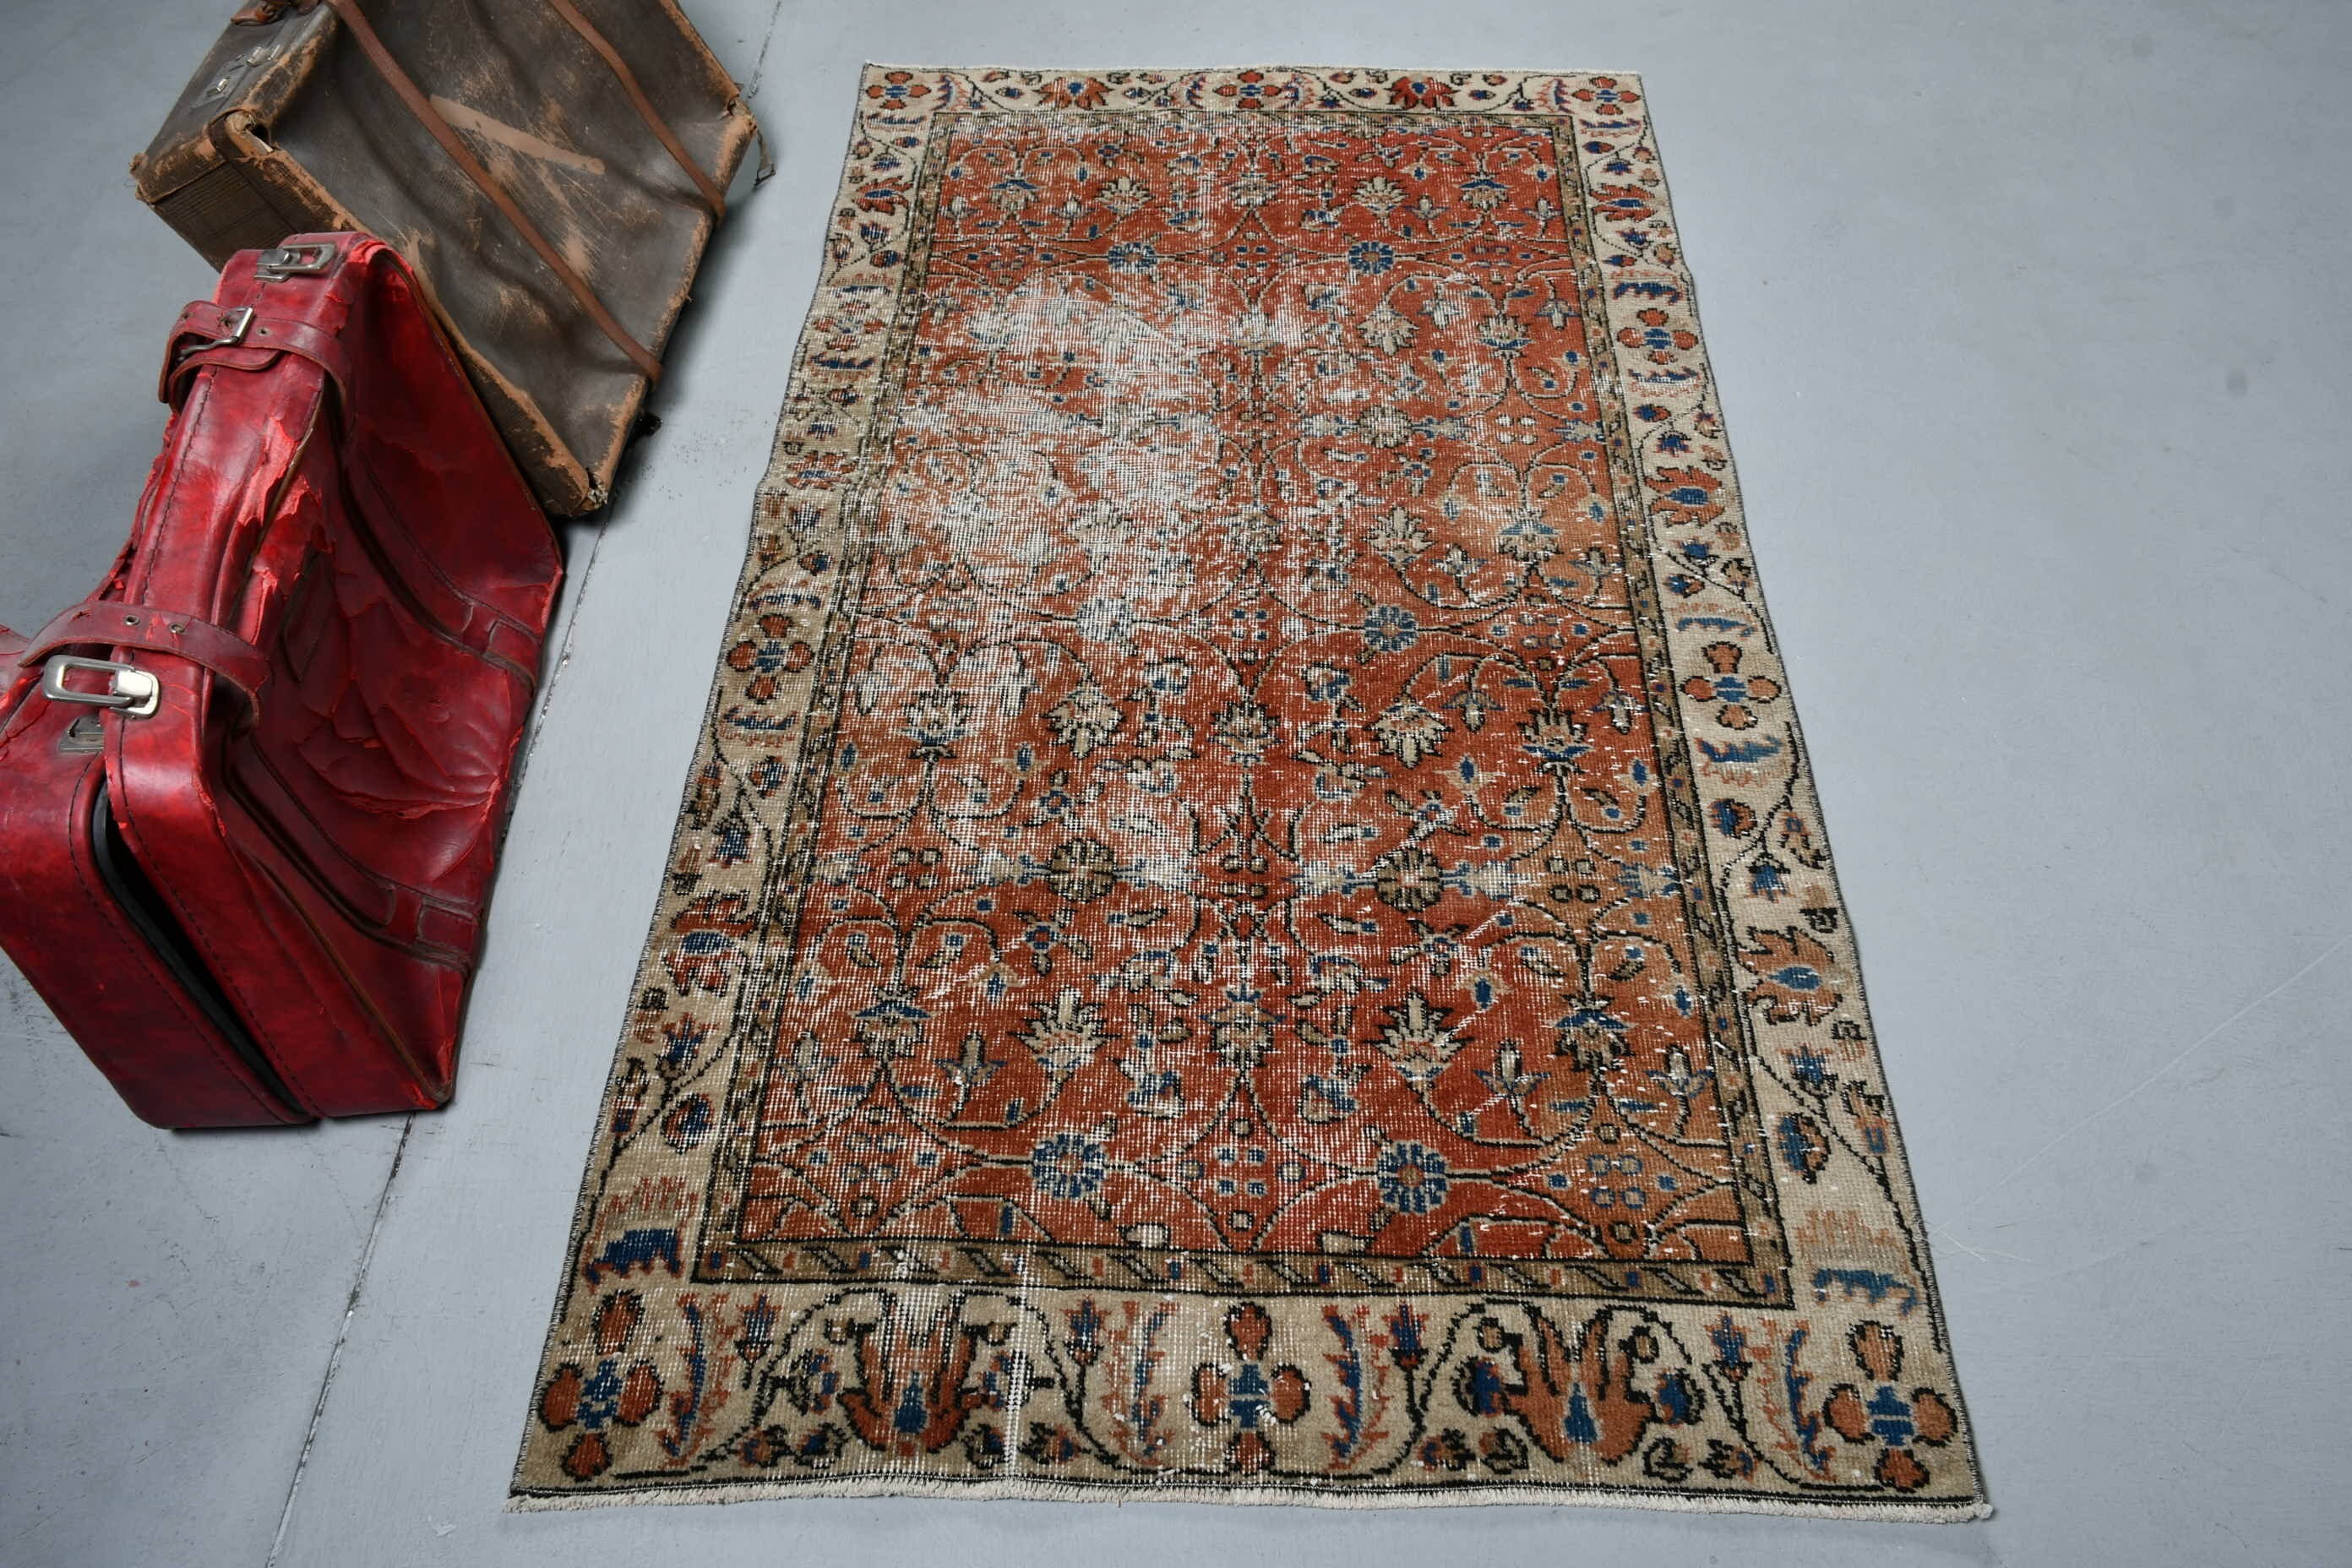 Entry Rug, Rugs for Entry, Oriental Rugs, Turkish Rugs, Kitchen Rug, Vintage Rugs, Red Oriental Rugs, 3.3x6.1 ft Accent Rug